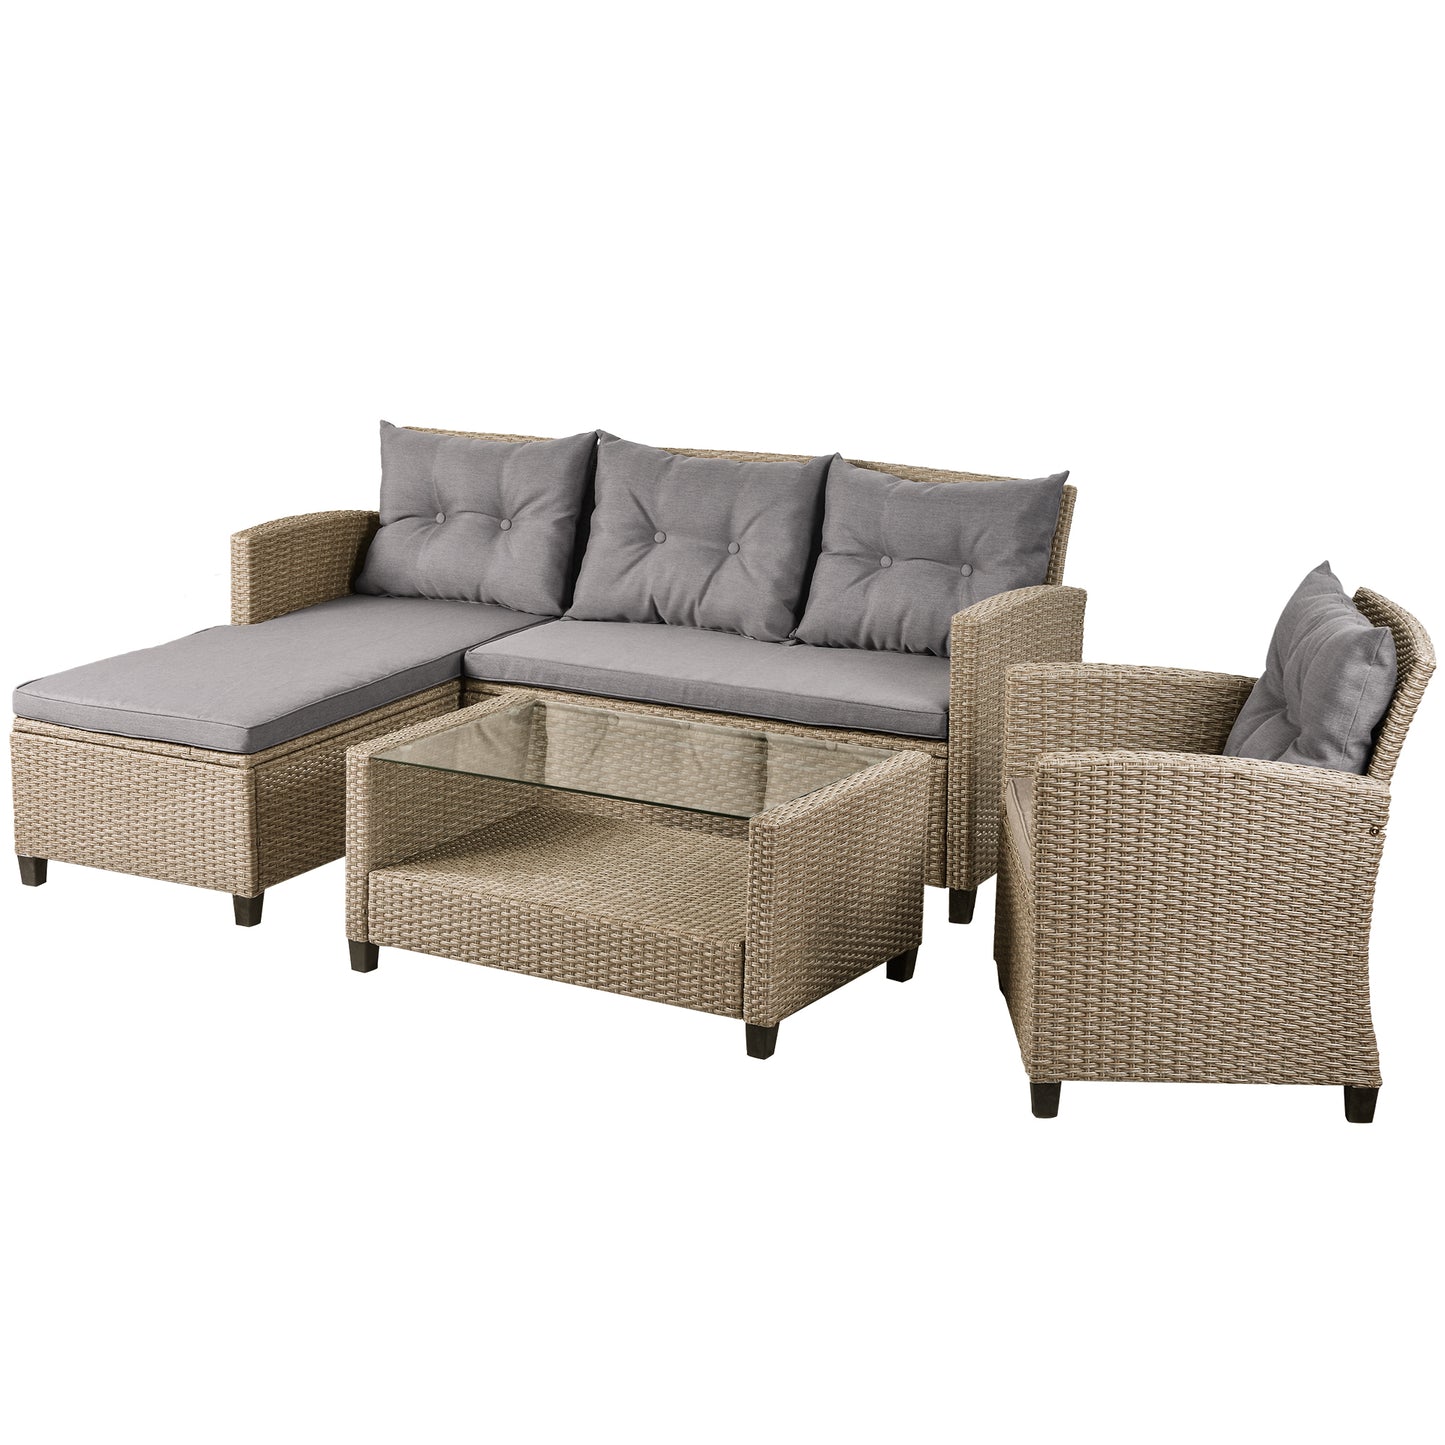 U_STYLE Outdoor, Patio Furniture Sets, 4 Piece Conversation Set Wicker Ratten Sectional Sofa with Seat Cushions(Beige Brown)